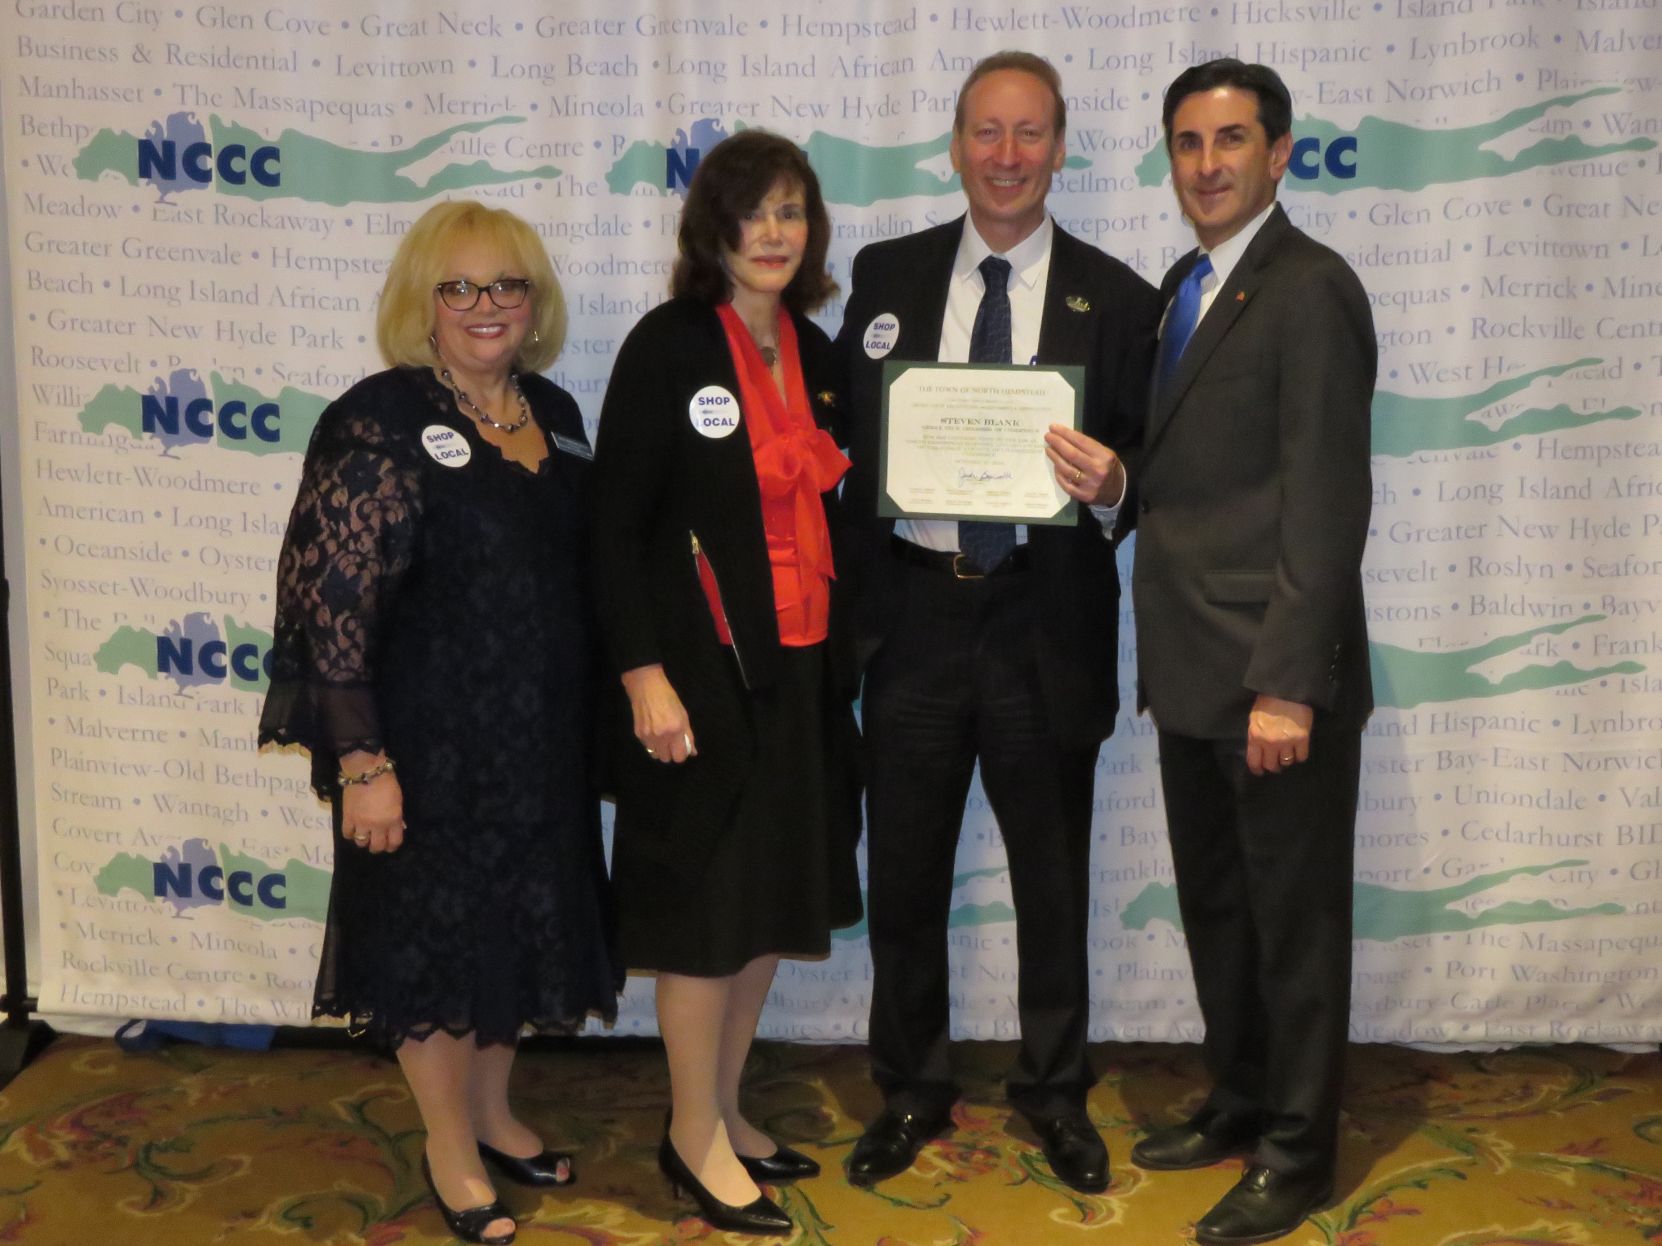 Blank Slate Media publisher awarded by Great Neck Chamber of Commerce